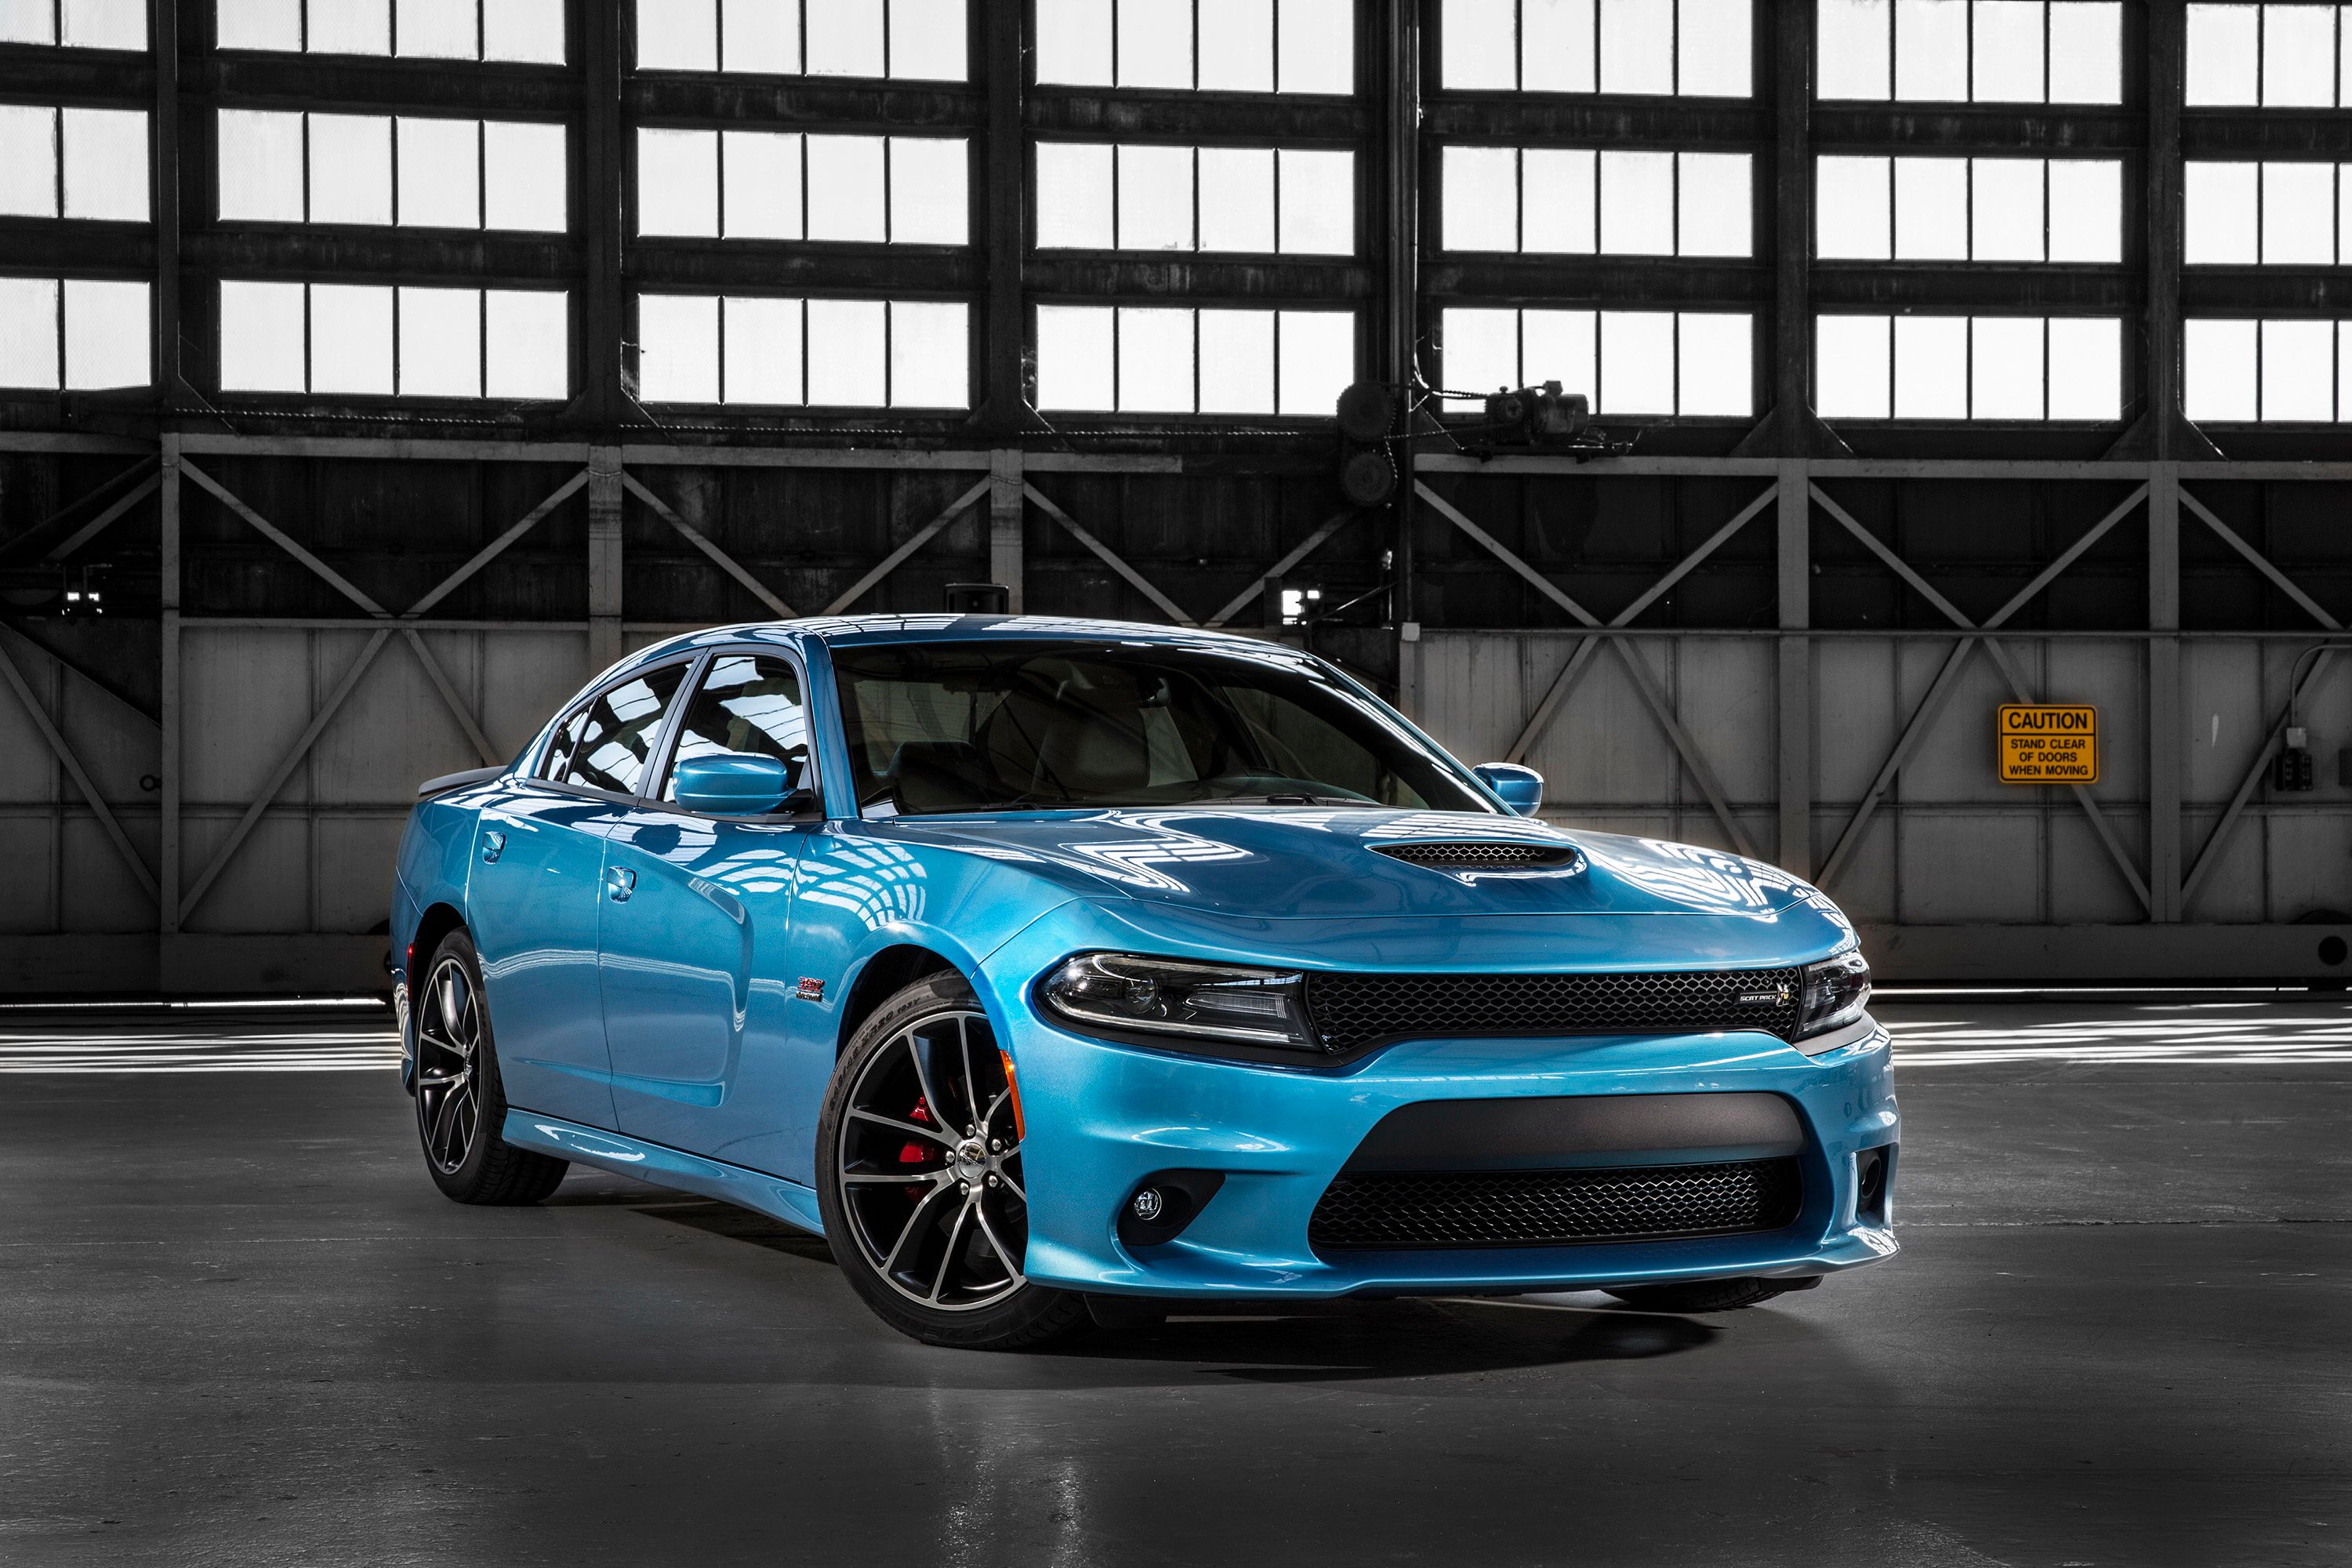 Dodge Charger R/T Scat Pack - $41,090